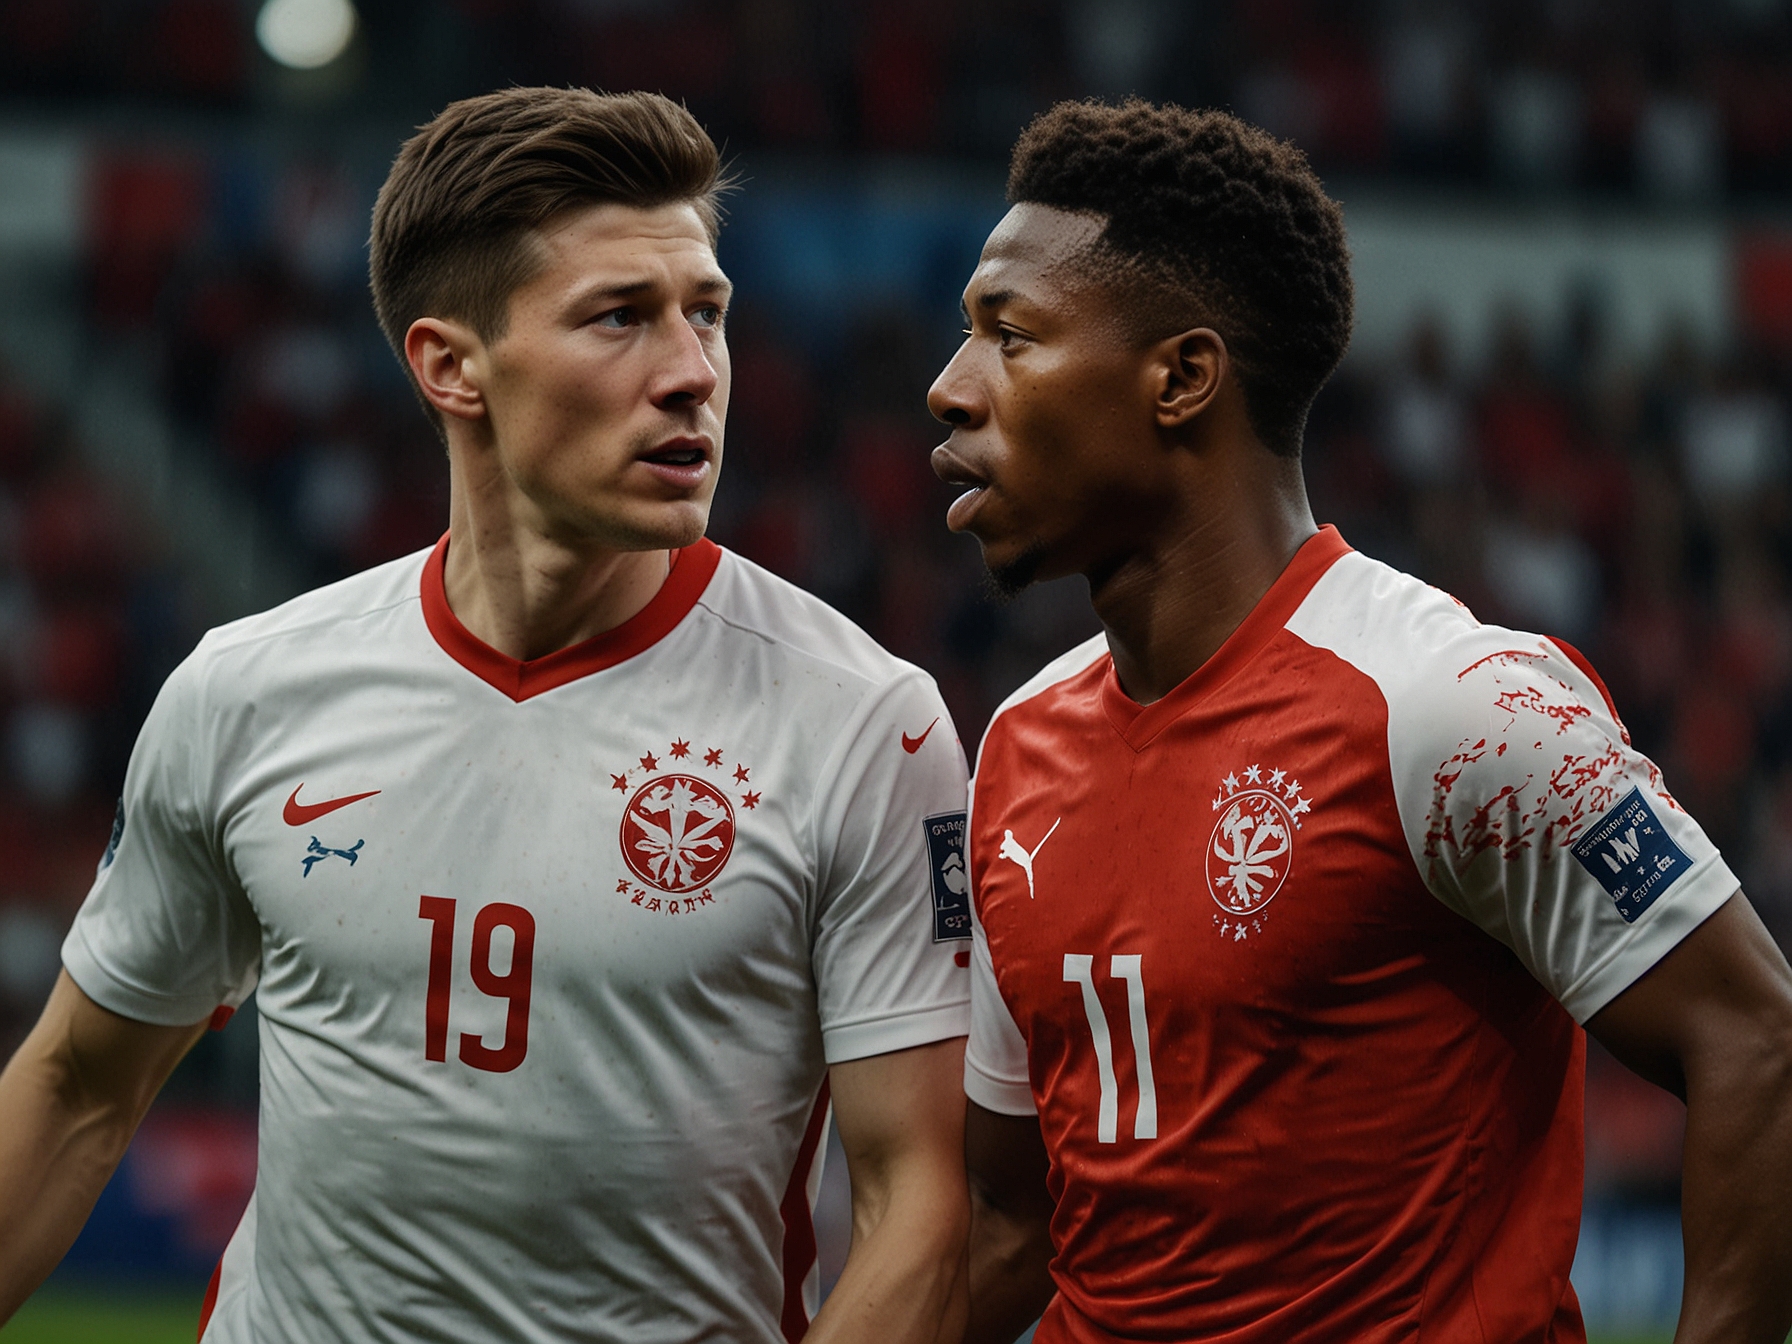 Poland's striker Robert Lewandowski goes head-to-head with Austria's David Alaba. The image captures the intensity and key player matchups expected in this crucial Euro 2024 Group D encounter.